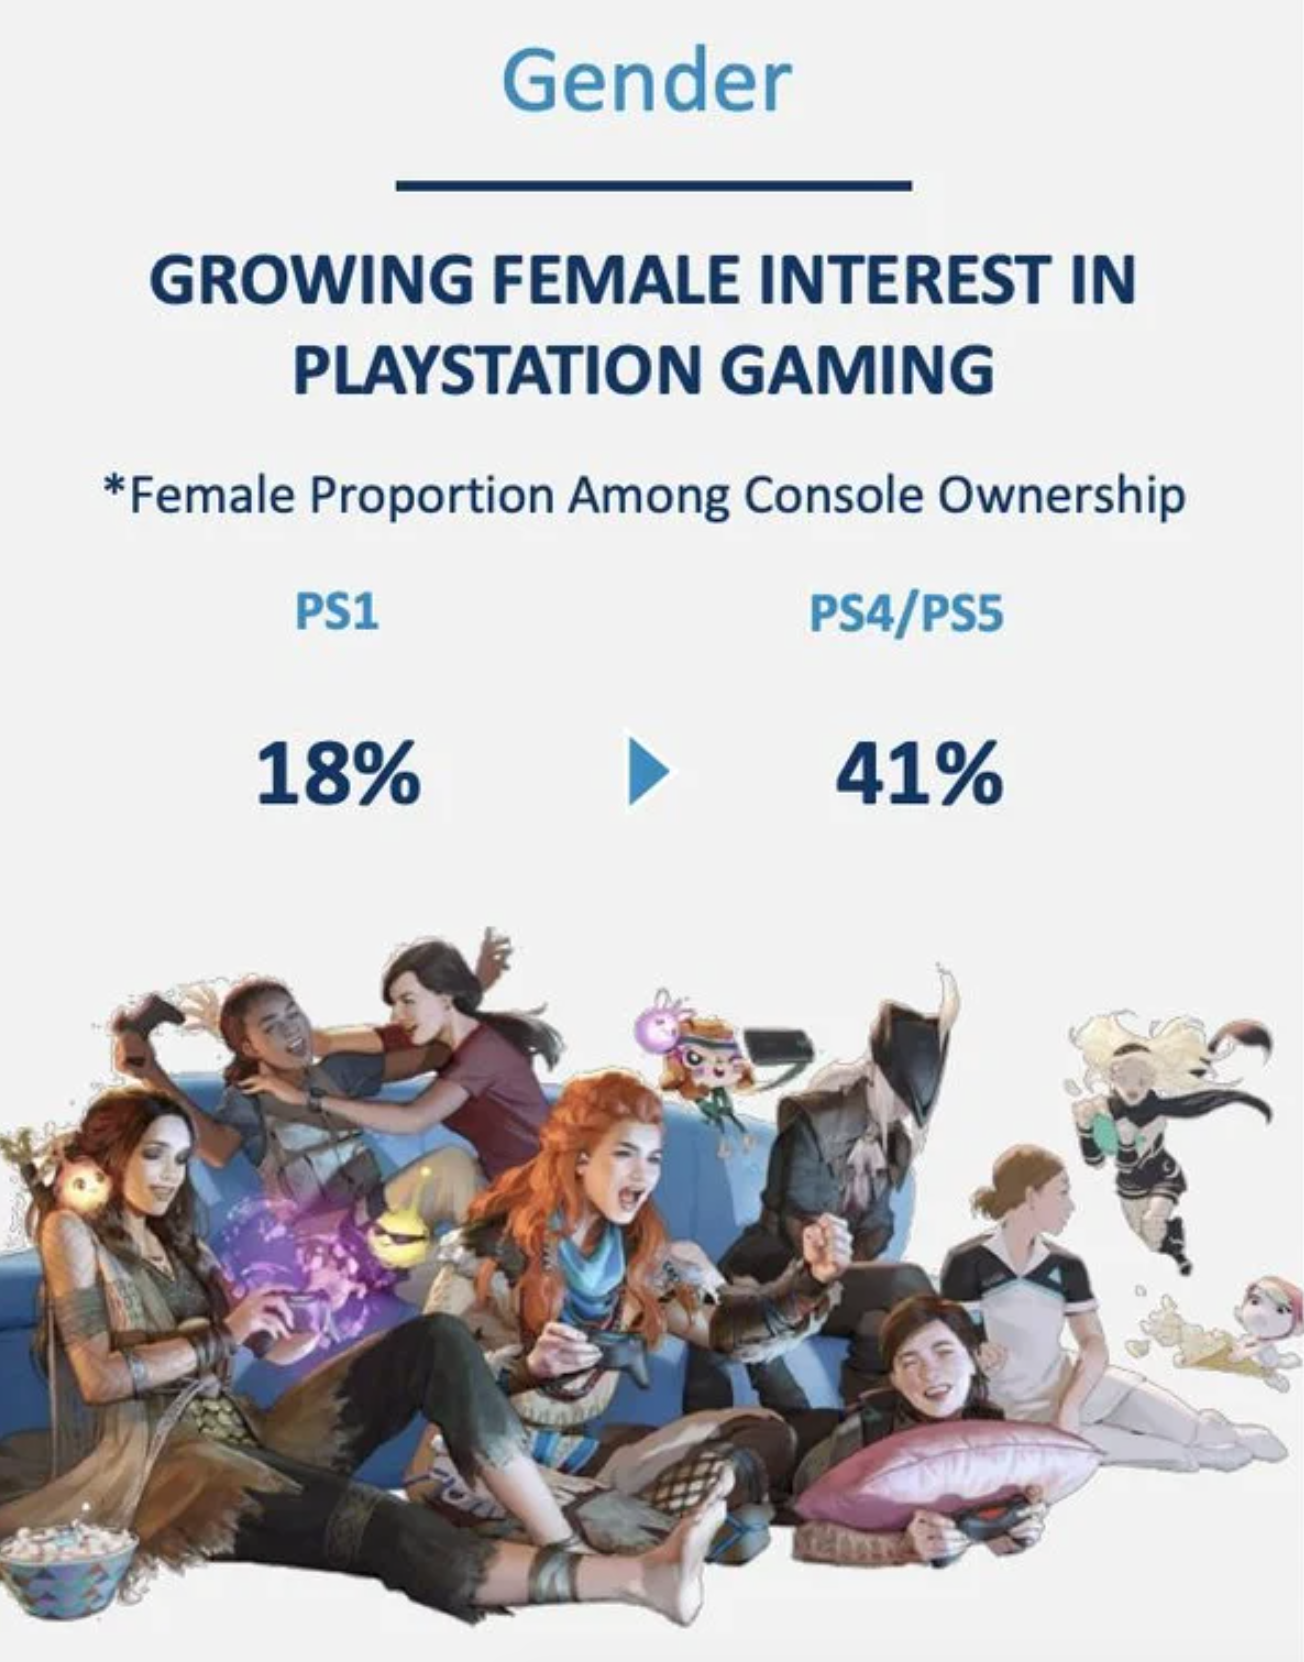 funny gaming memes - playstation international women's day - Gender Growing Female Interest In Playstation Gaming Female Proportion Among Console Ownership PS1 PS4PS5 18% 41%